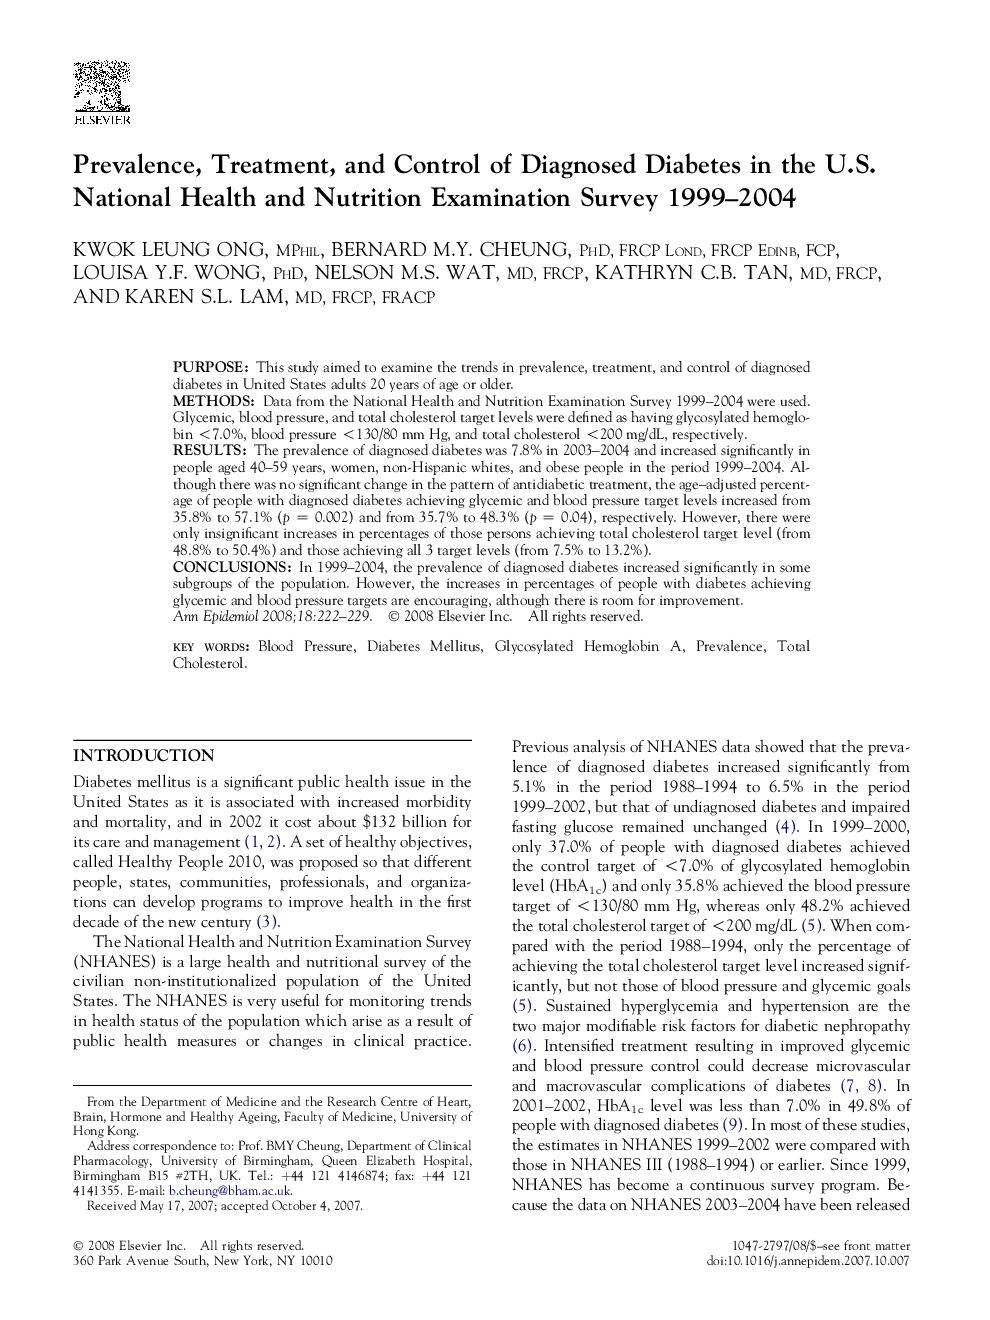 Prevalence, Treatment, and Control of Diagnosed Diabetes in the U.S. National Health and Nutrition Examination Survey 1999–2004